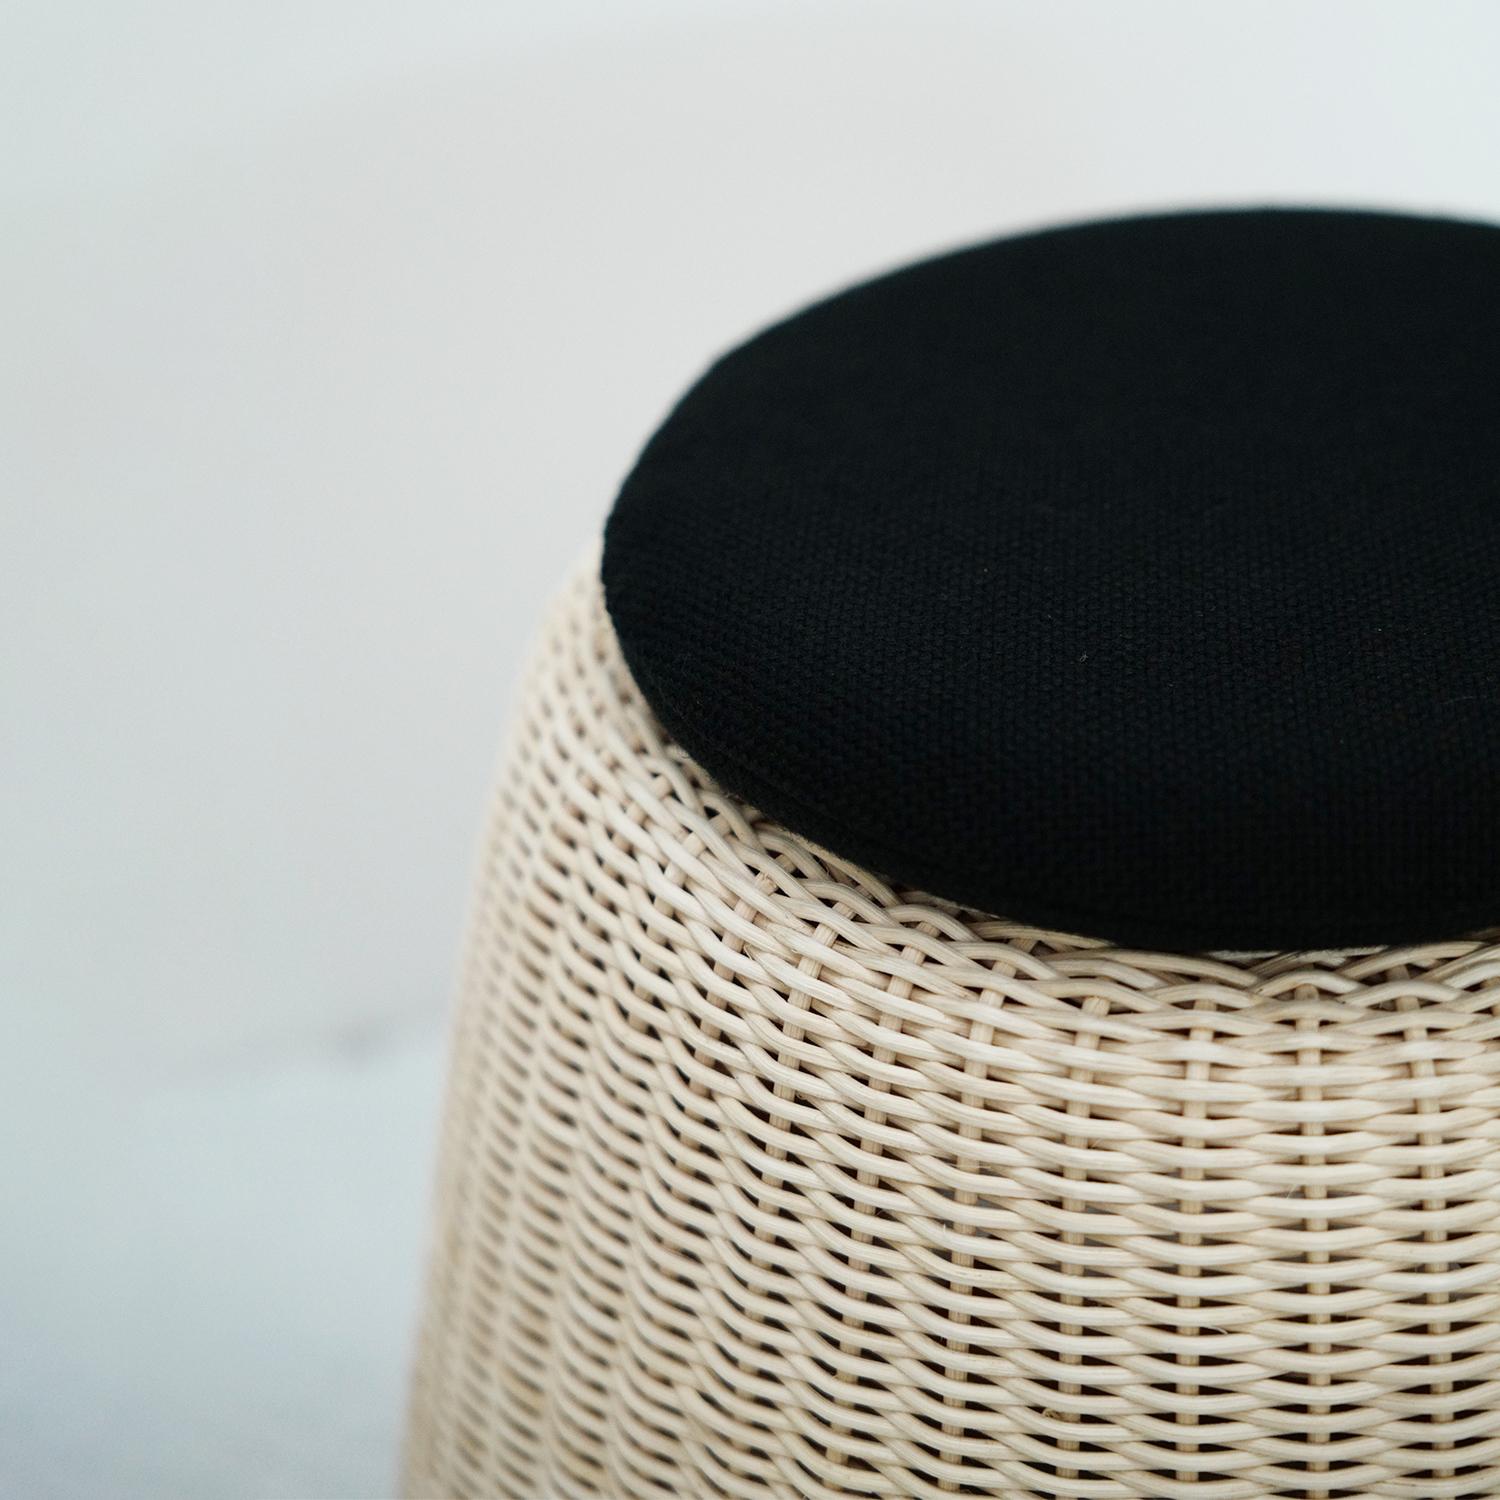 This is the smallest of Isamu Kenmochi's Ratan stools. It is just the right size for small children.
The cushion is fixed so it will not fall off. 
This is a made-to-order product and takes about 4 months to produce.
You can choose the fabric of the